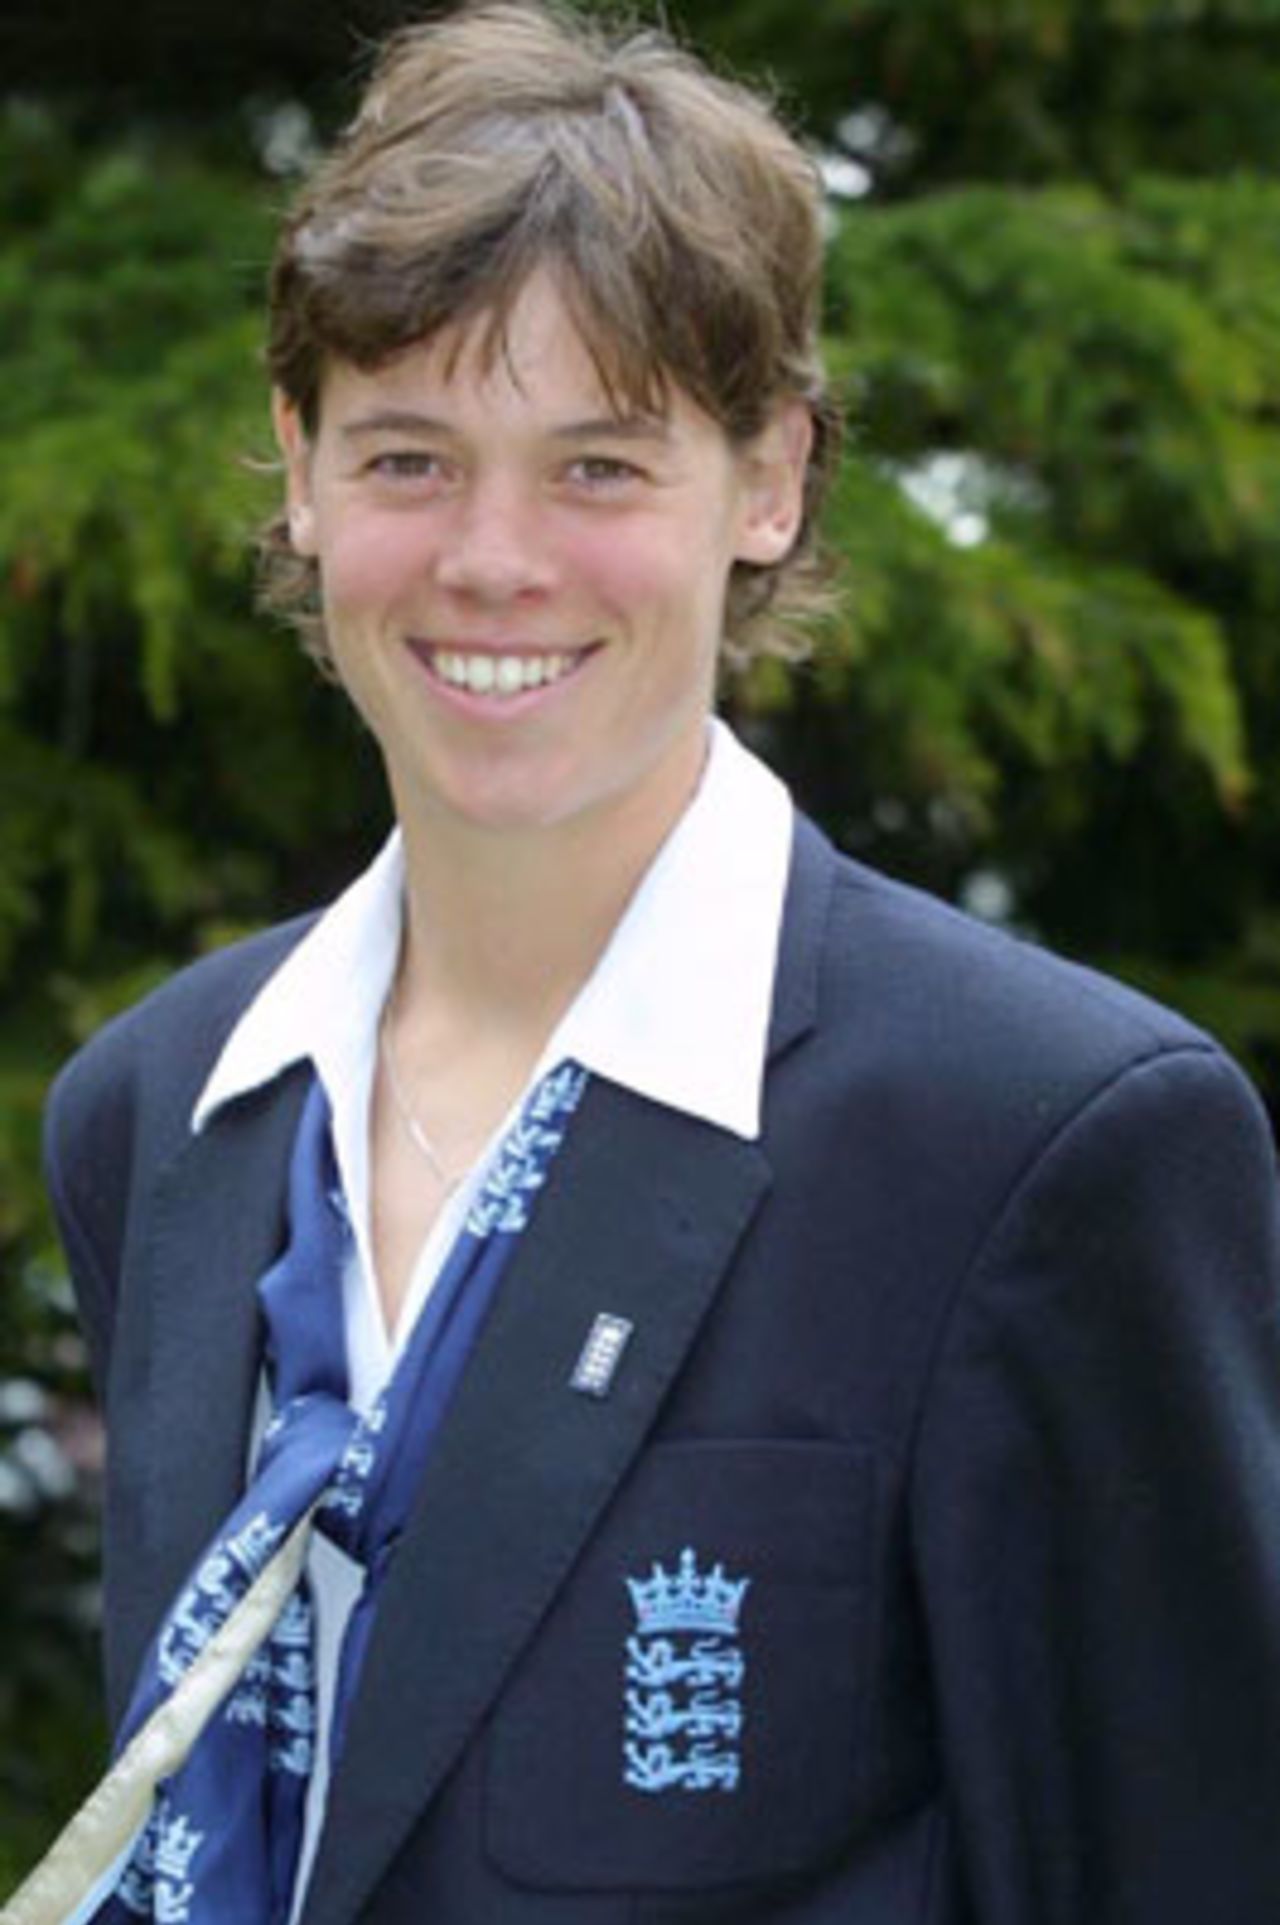 Portrait of Lucy Pearson - England player in the CricInfo Women's World Cup 2000